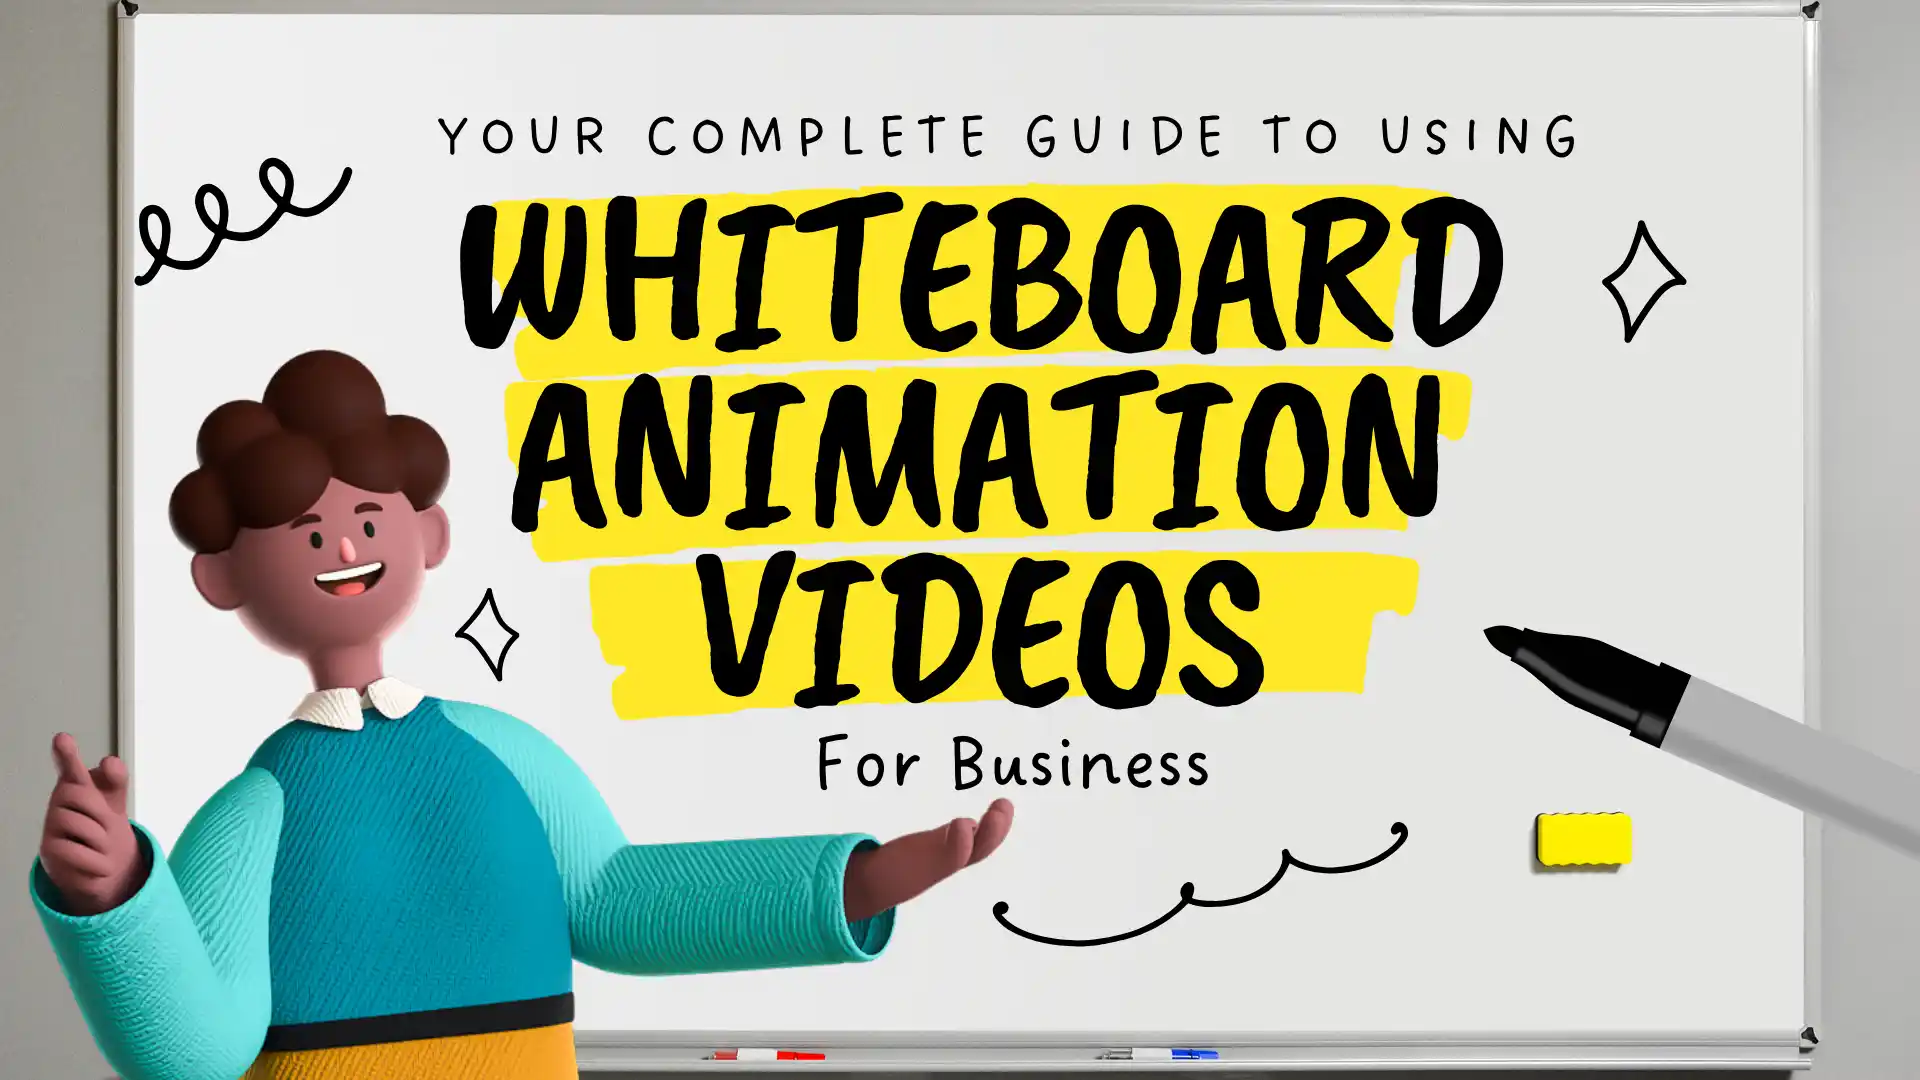 Whiteboard animation videos for business